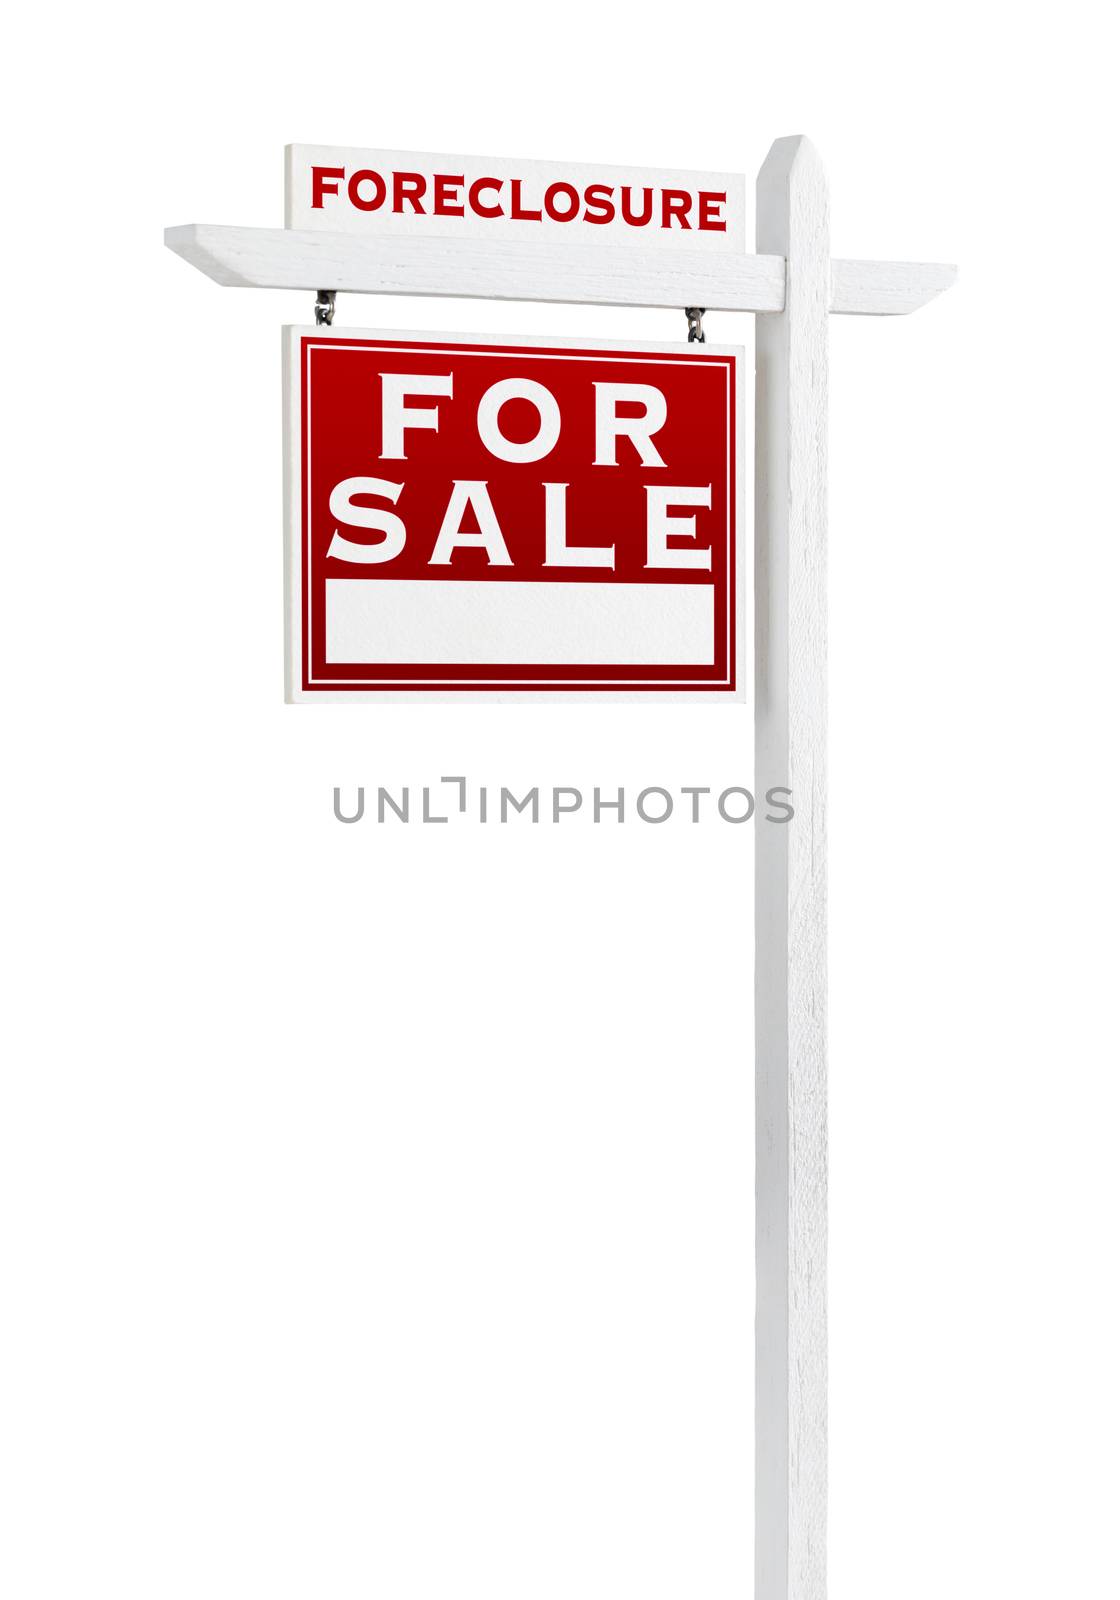 Left Facing Foreclosure Sold For Sale Real Estate Sign Isolated  by Feverpitched